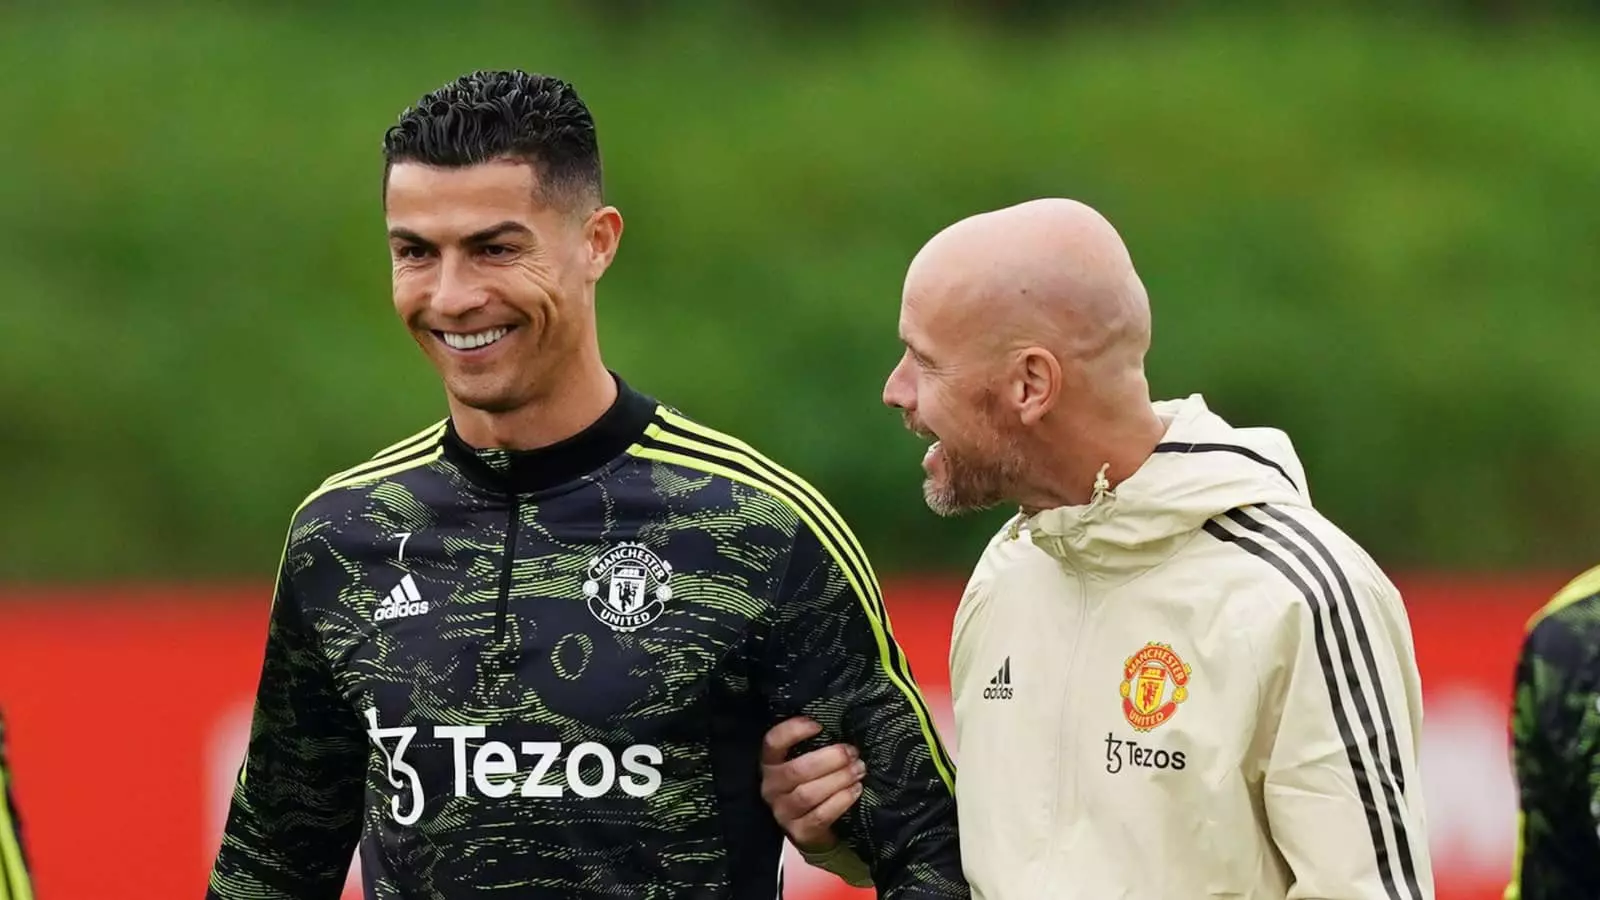 I don't have respect for him, says Cristiano Ronaldo about Manchester United coach Erik ten Hag